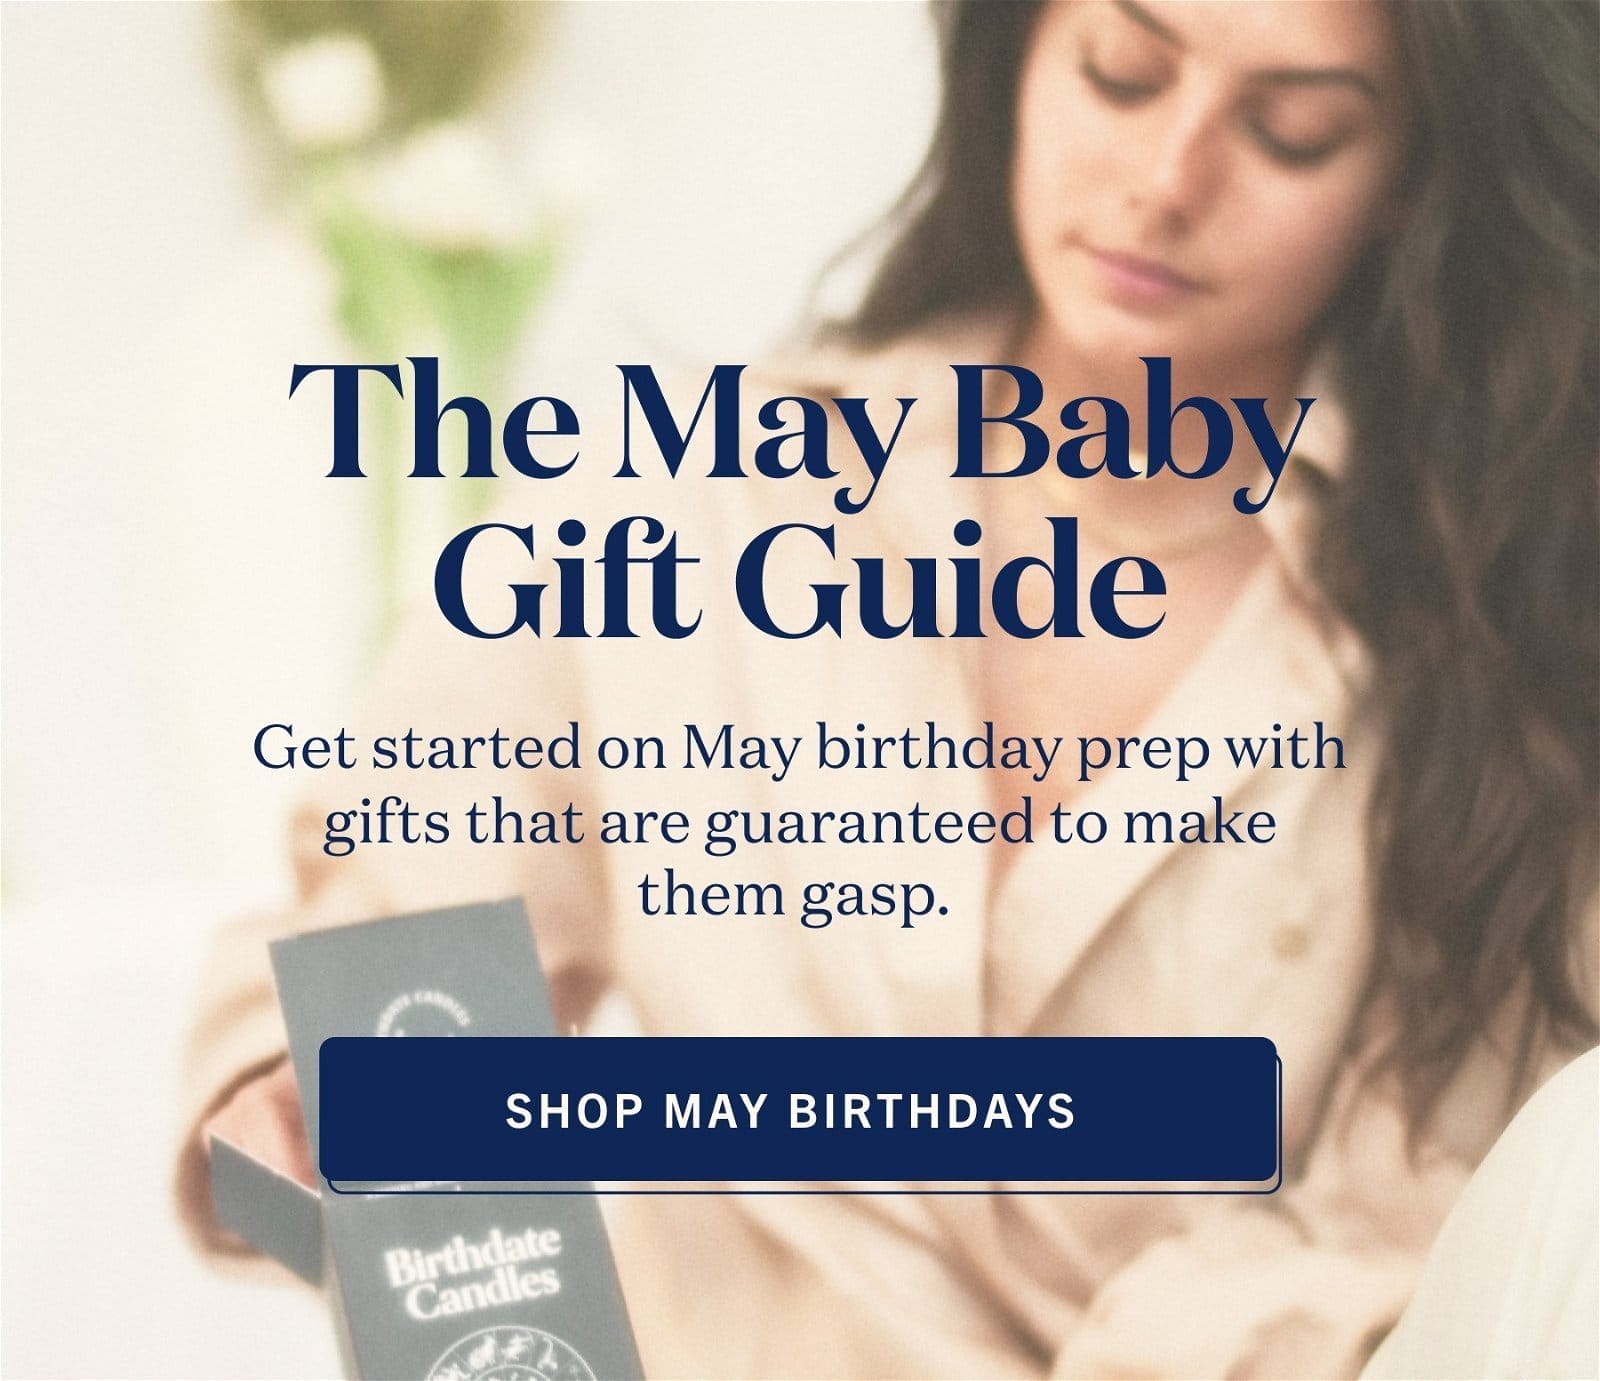 The May Baby Gift Guide Get started on May birthday prep with gifts that are guaranteed to make them gasp.\xa0 sHOP may birthdays